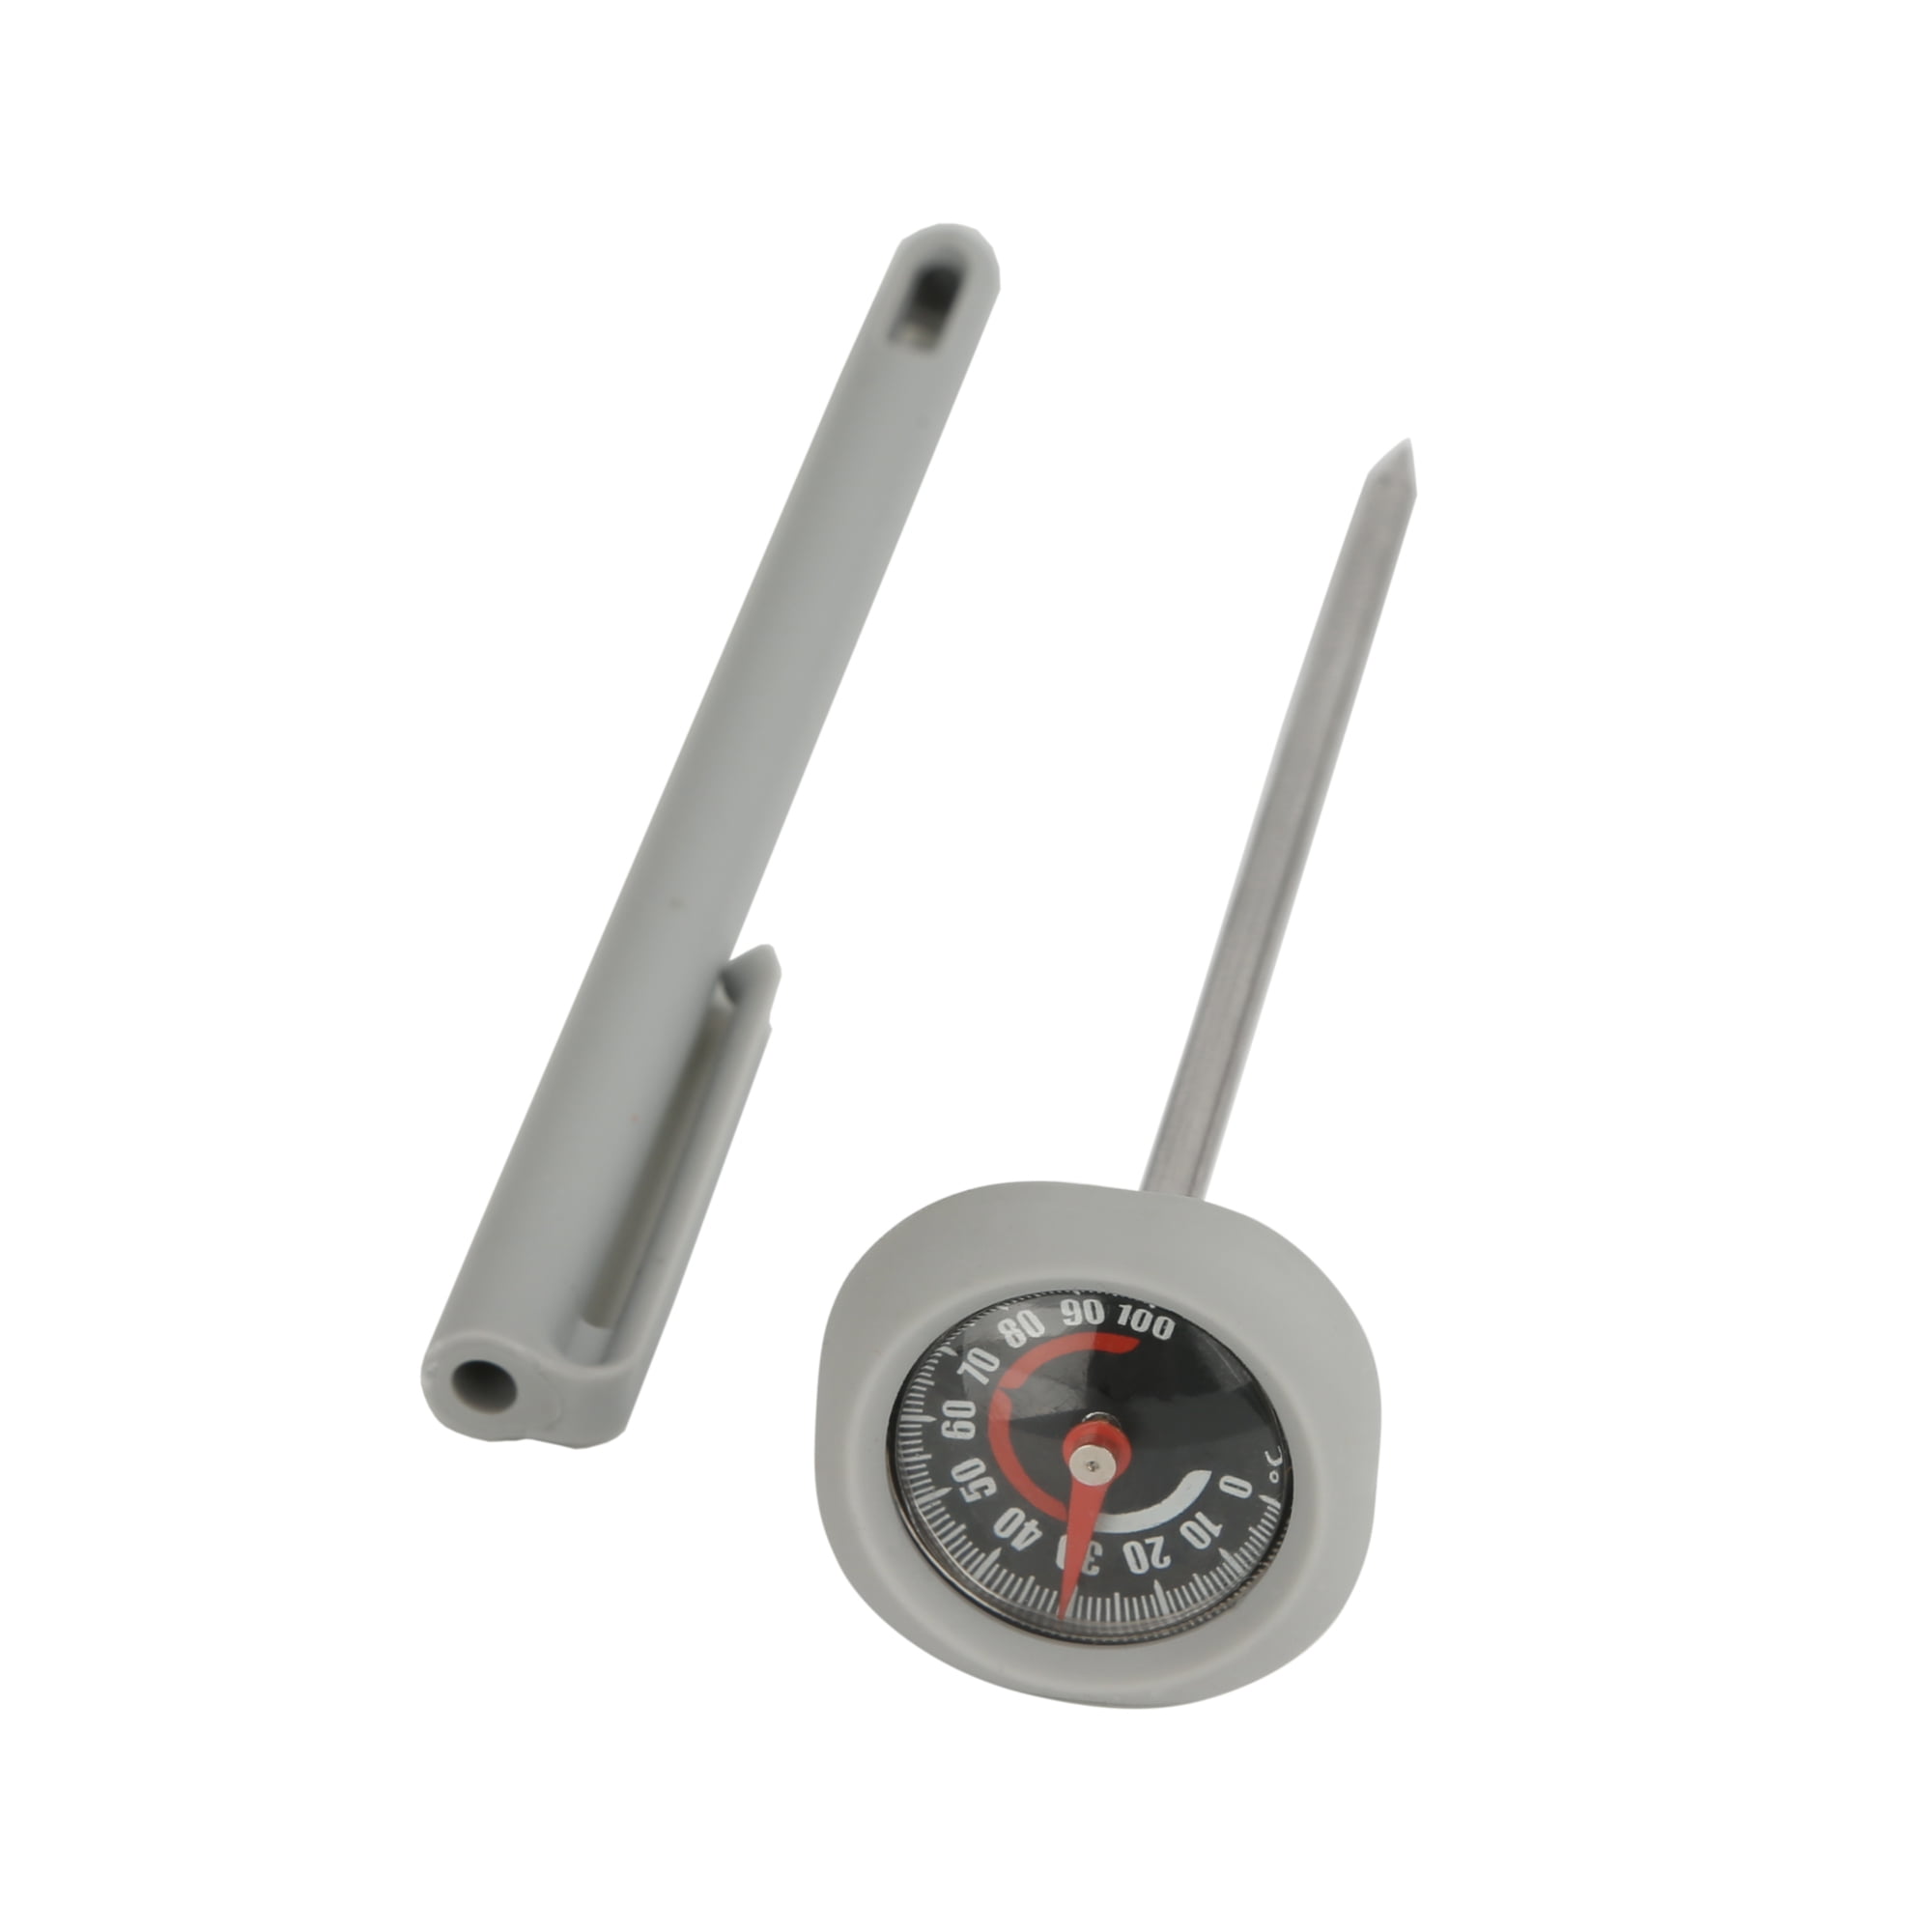 Mainstays Instant Response Kitchen Thermometer, Clip Attachment 